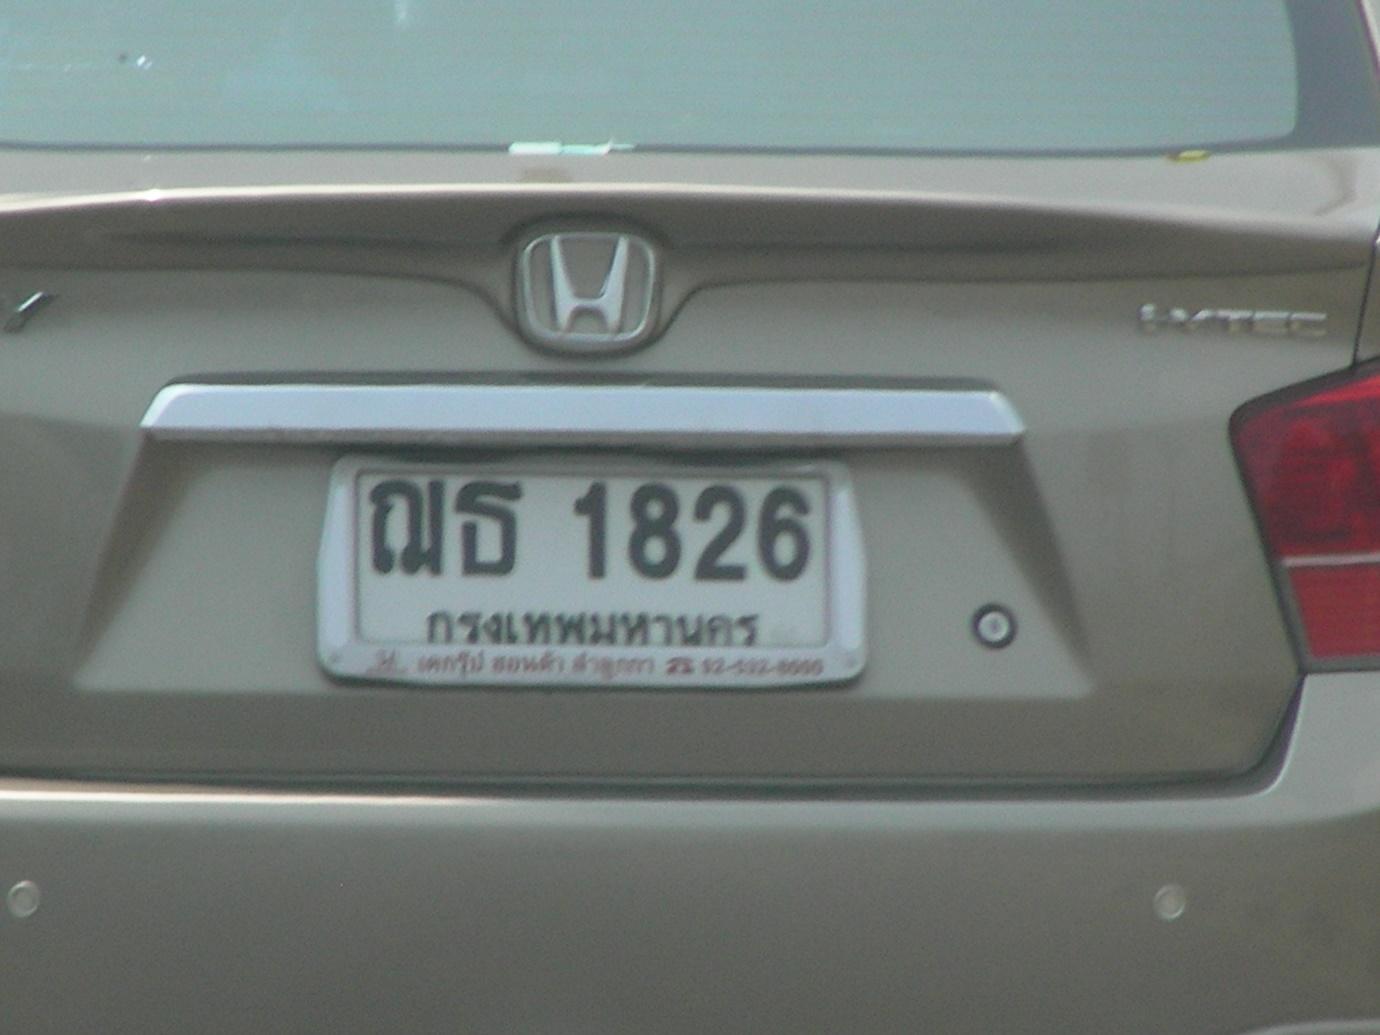 A close up of a car's license plate

Description automatically generated with medium confidence